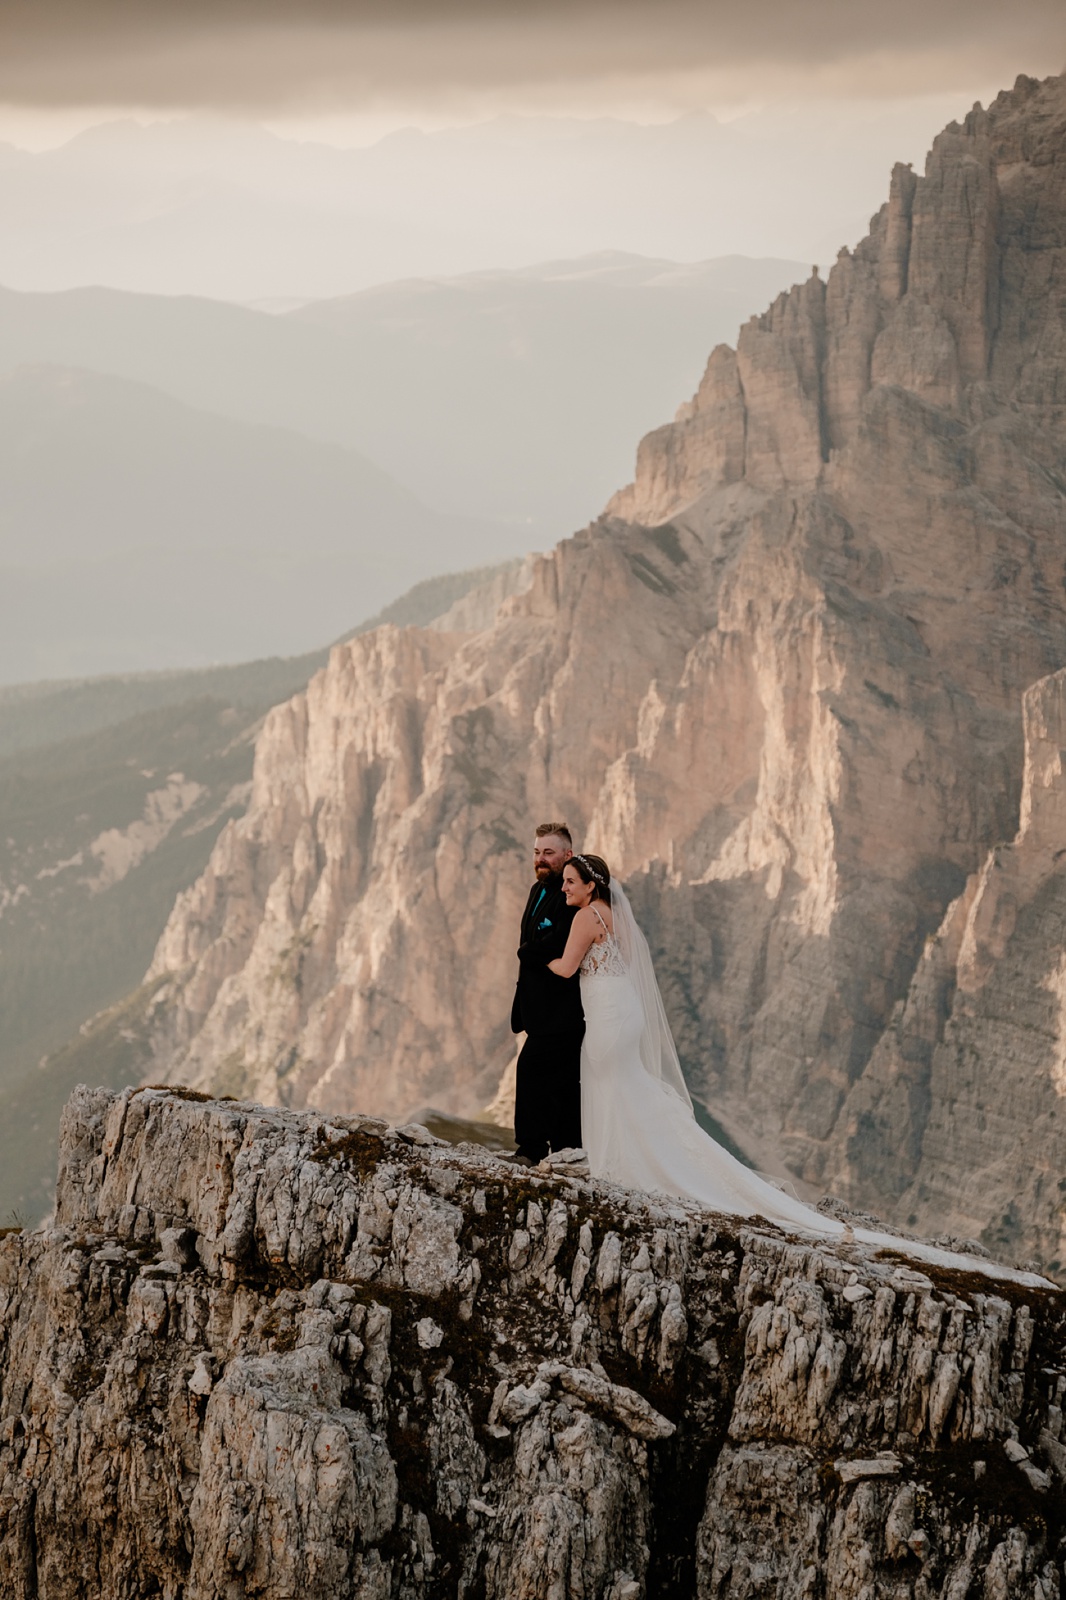 Bride and groom stand on the edge of a cliff and the bride embraces the groom from behind at sunset as the mountains glow pink behind them near a mountain refuge in the Dolomites.